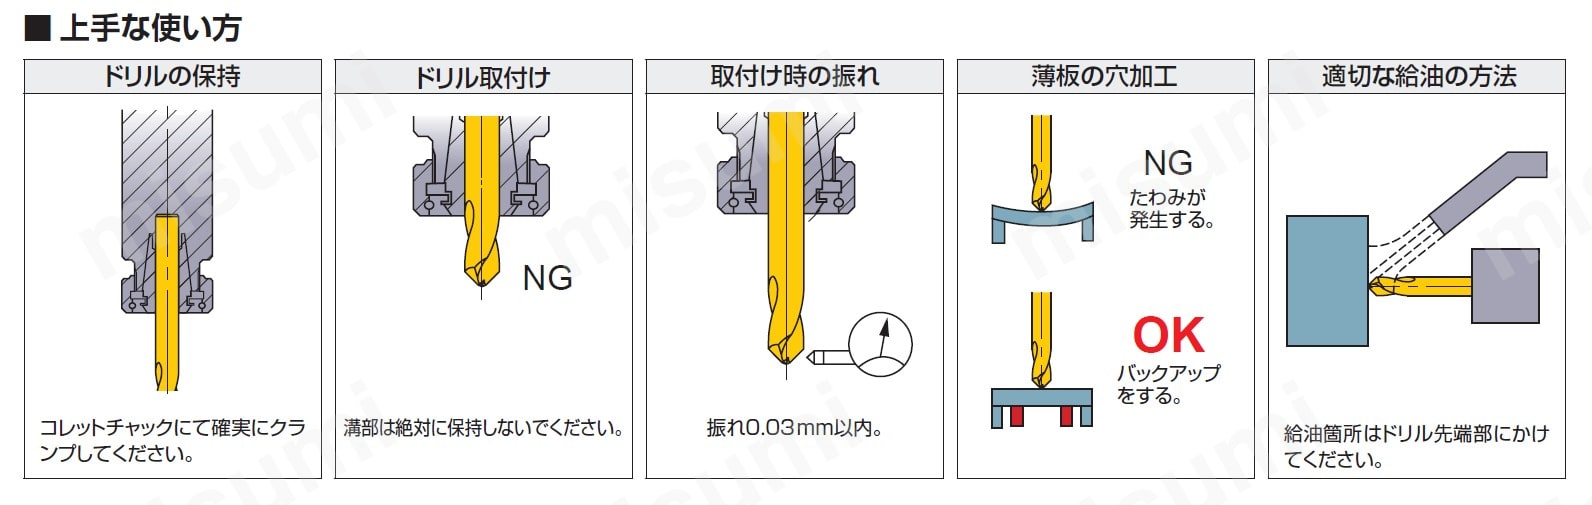 DLE1000S100P145-DP1020 | DLE リーディング・面取り加工用ソリッド